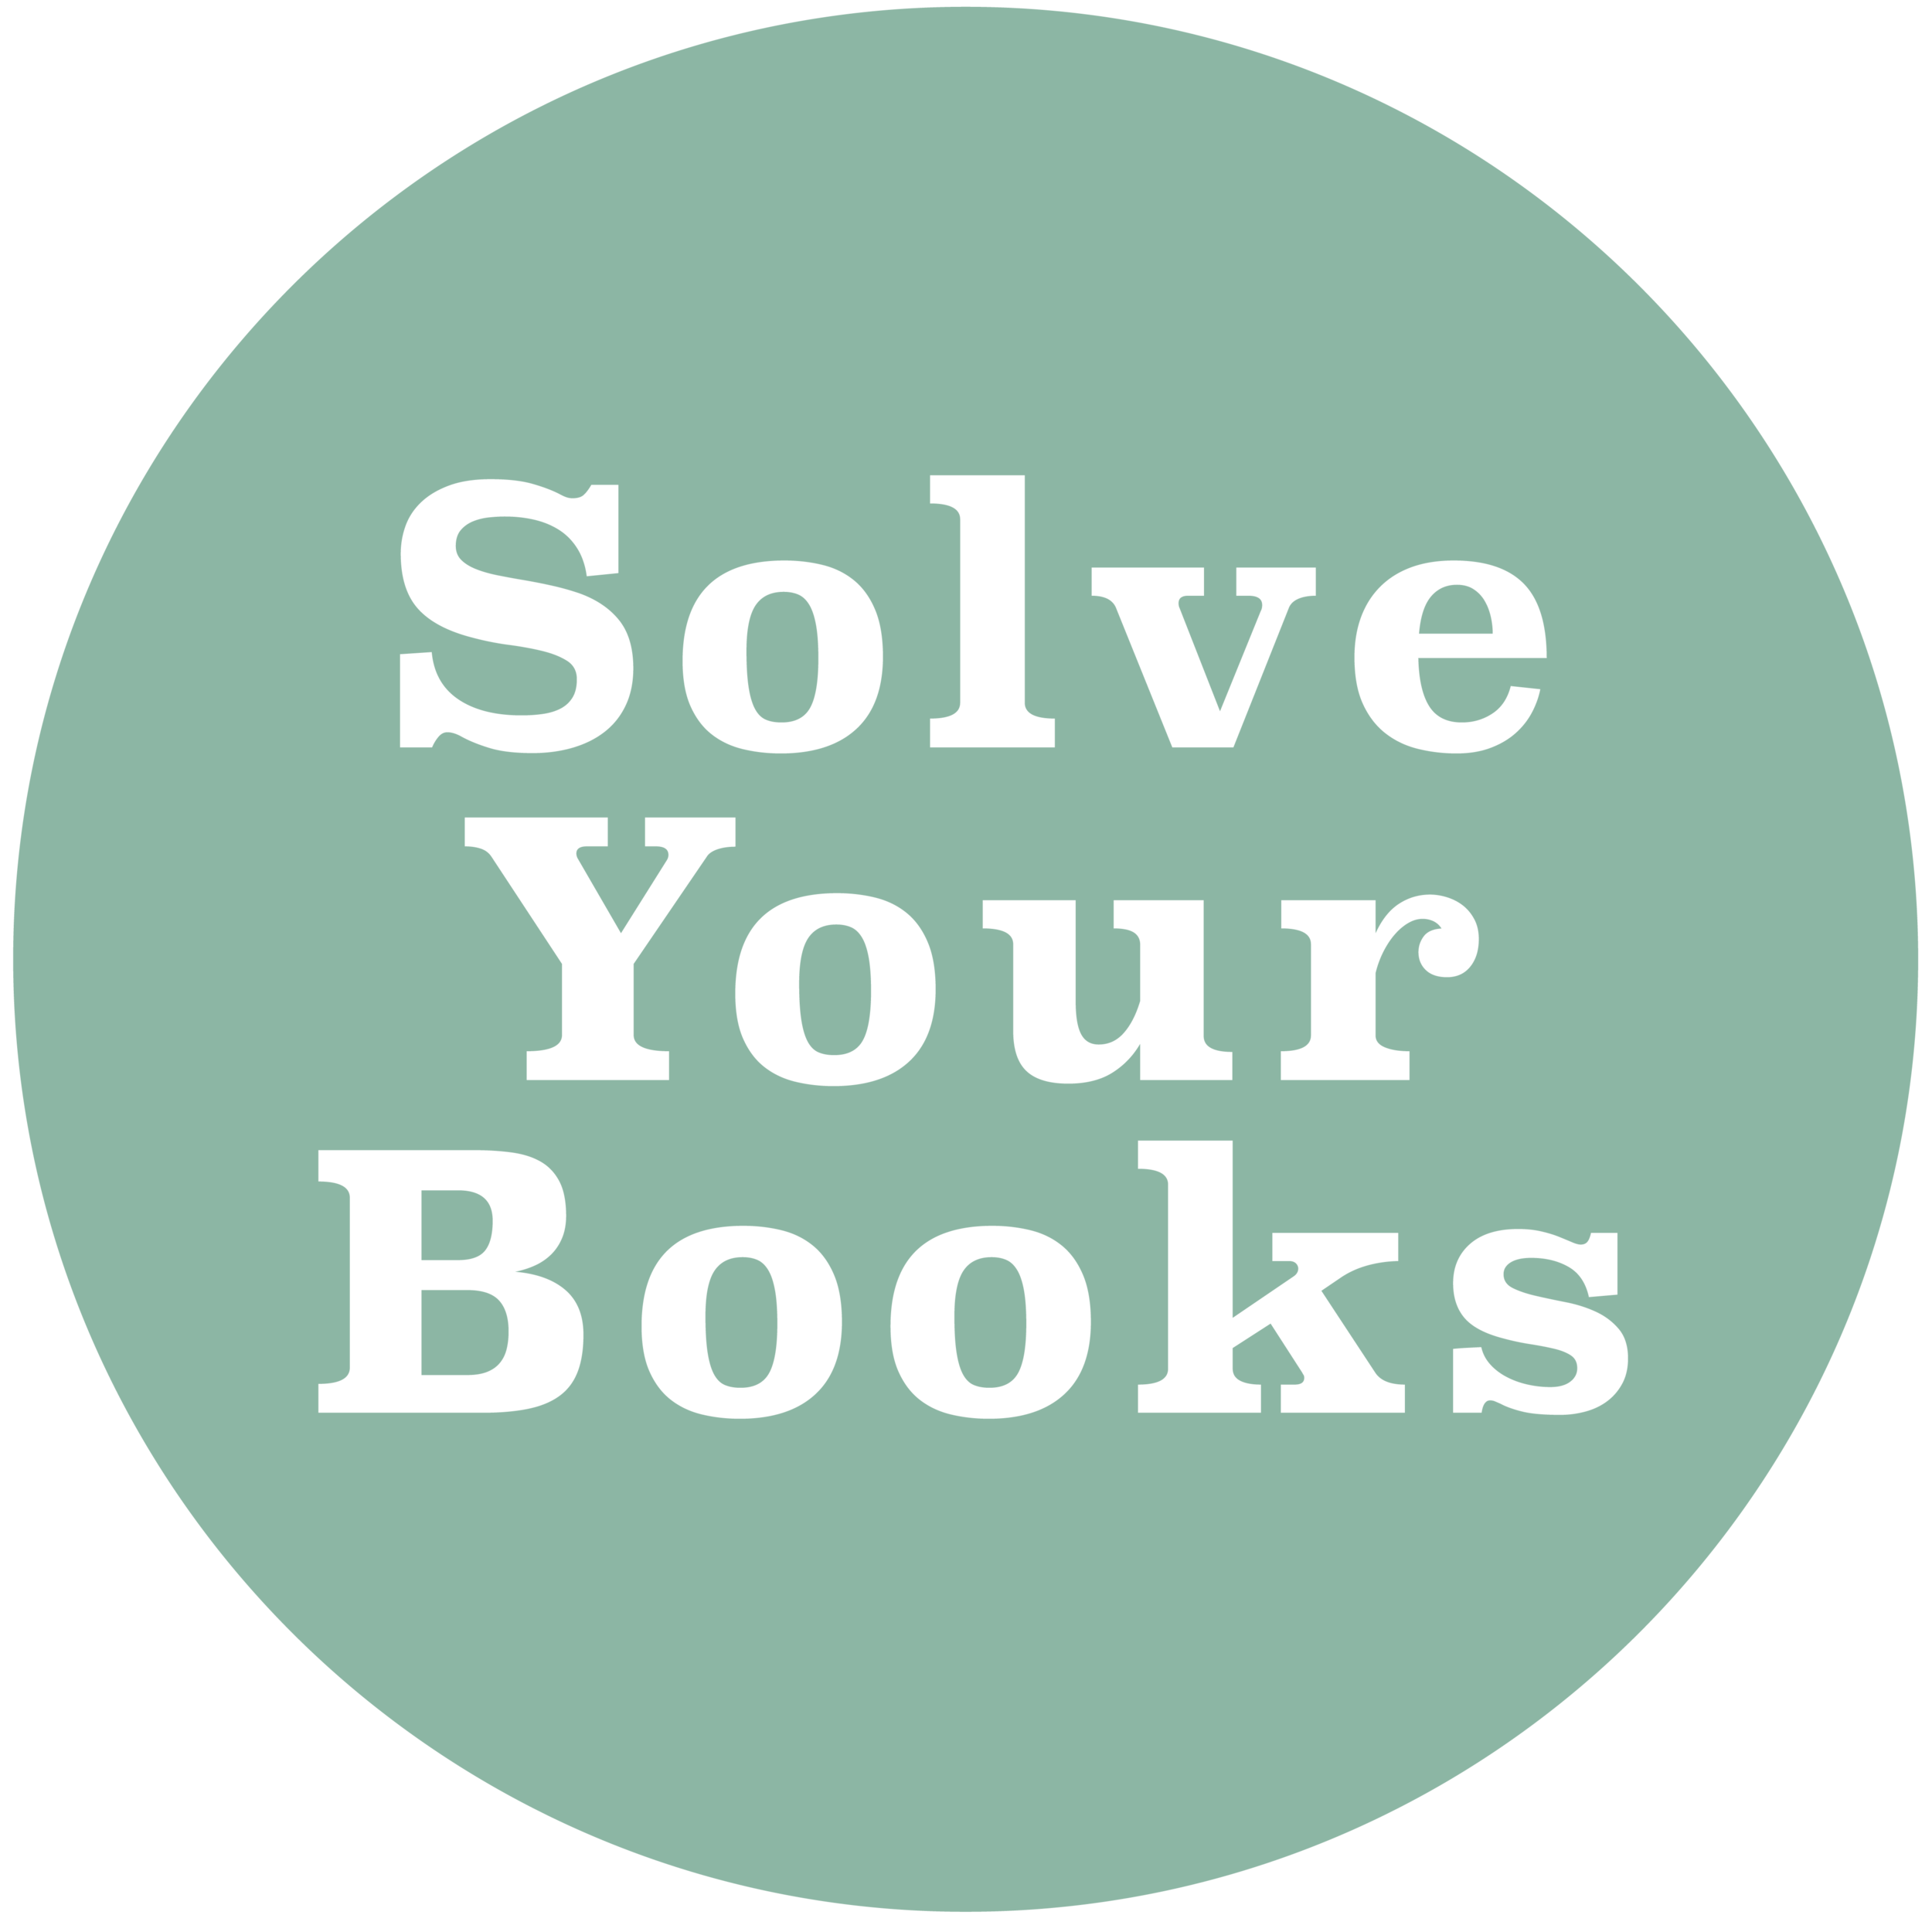 Solve Your Books